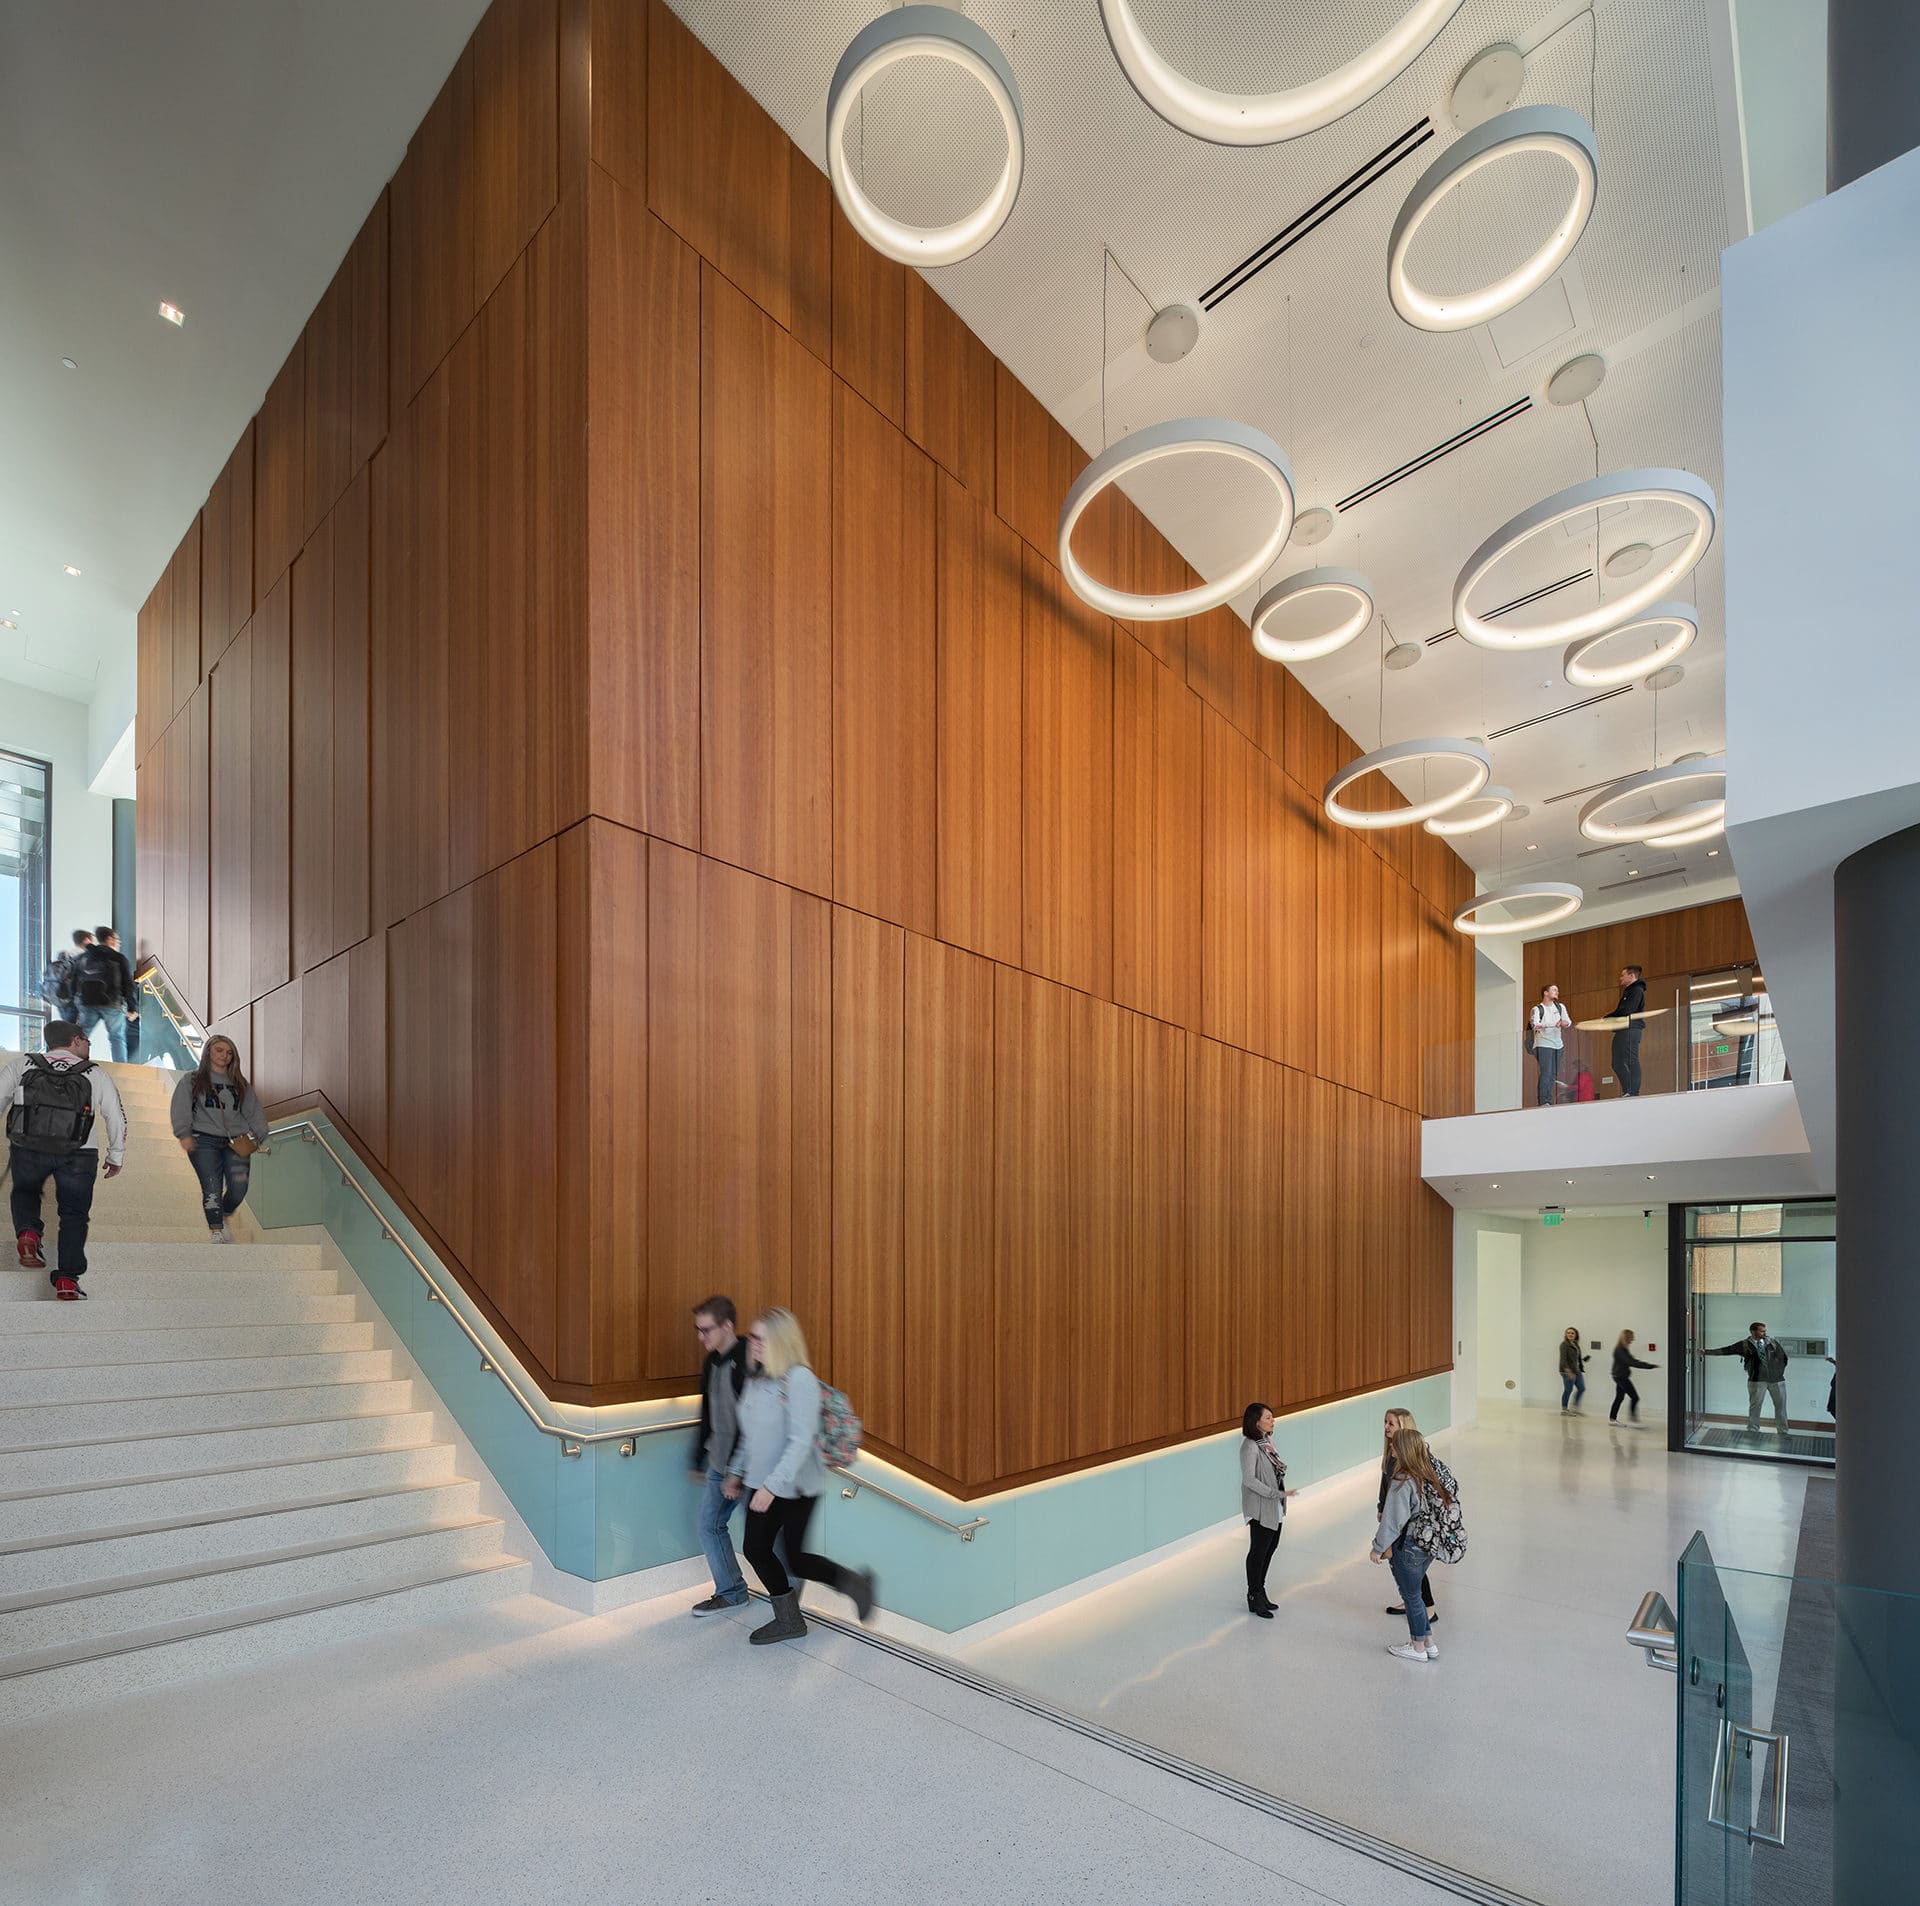 interior of university of pikeville health professions building designed by trivers architectural firm